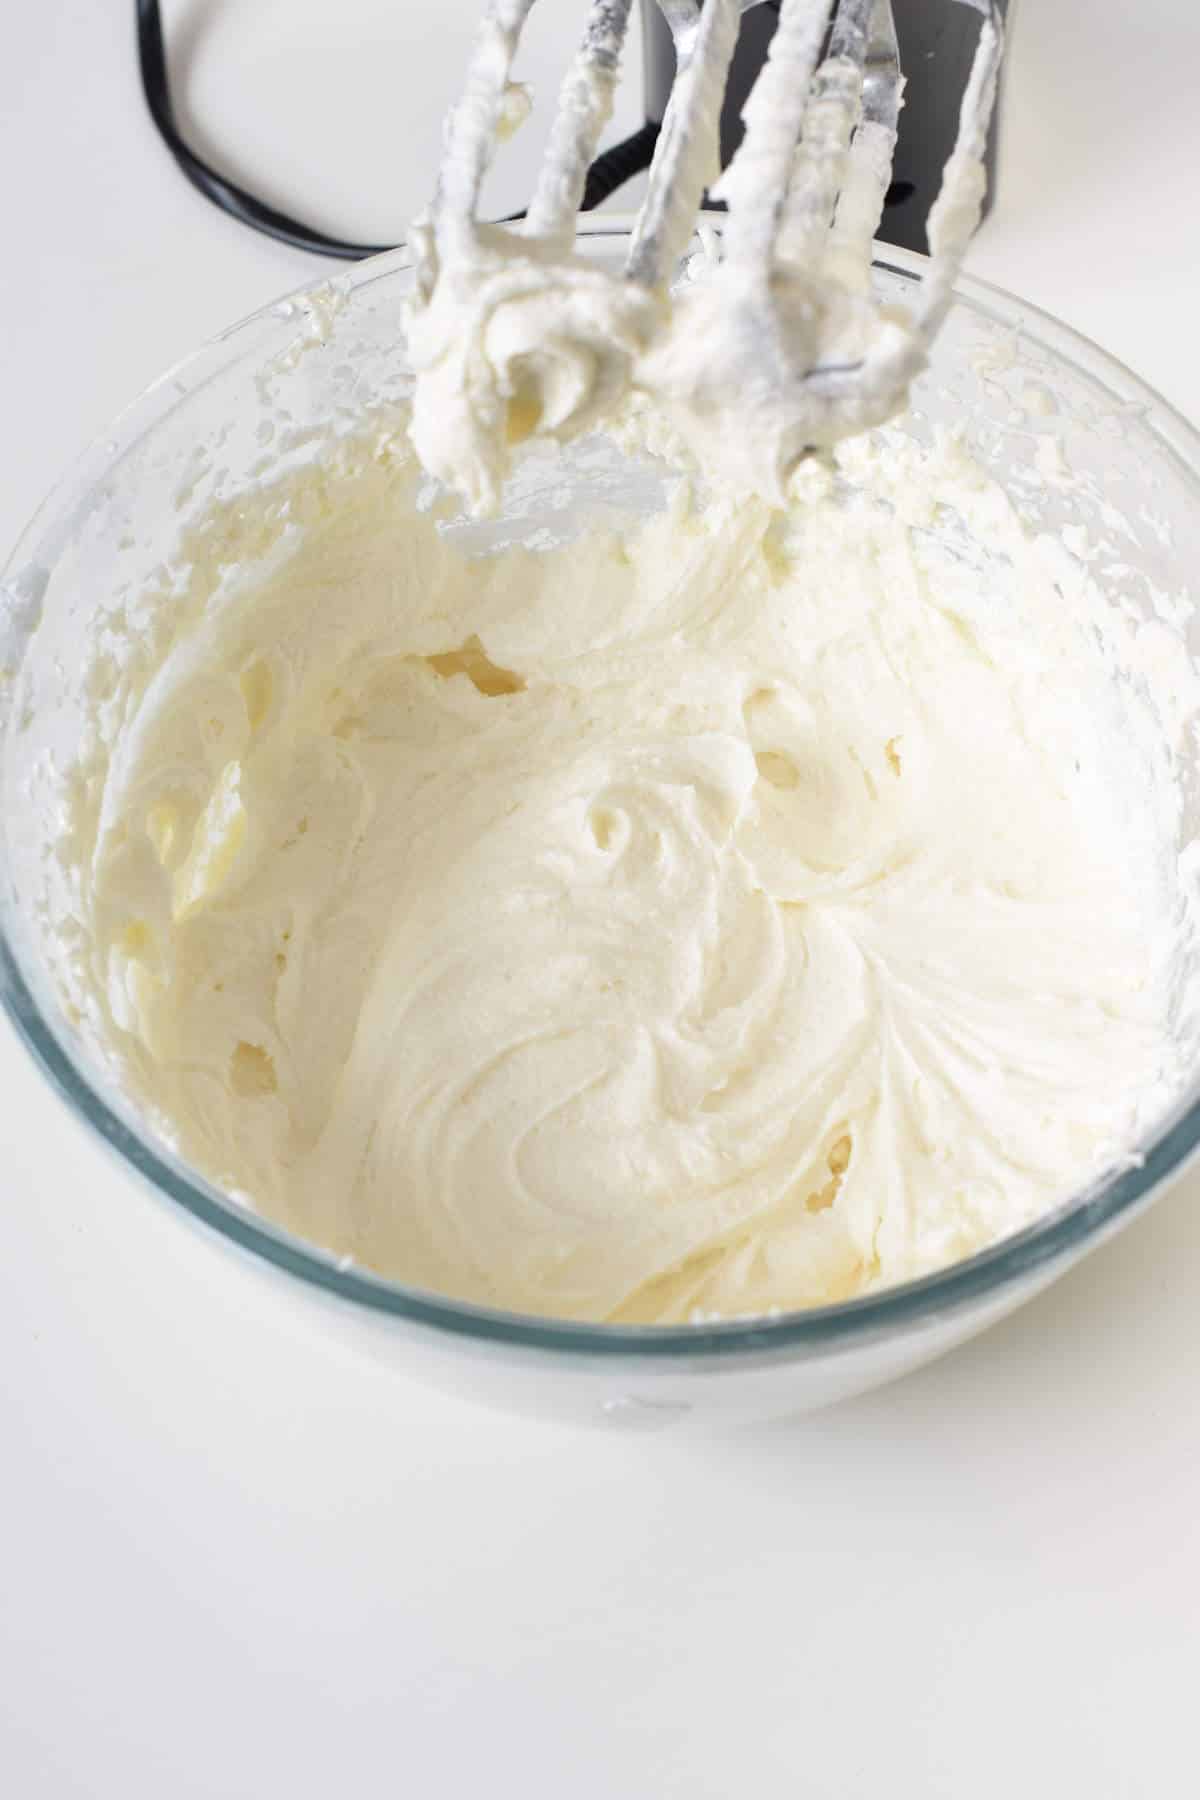 Vegan Vanilla Frosting in a mixing bowl with the blades of the whisker visible on top.